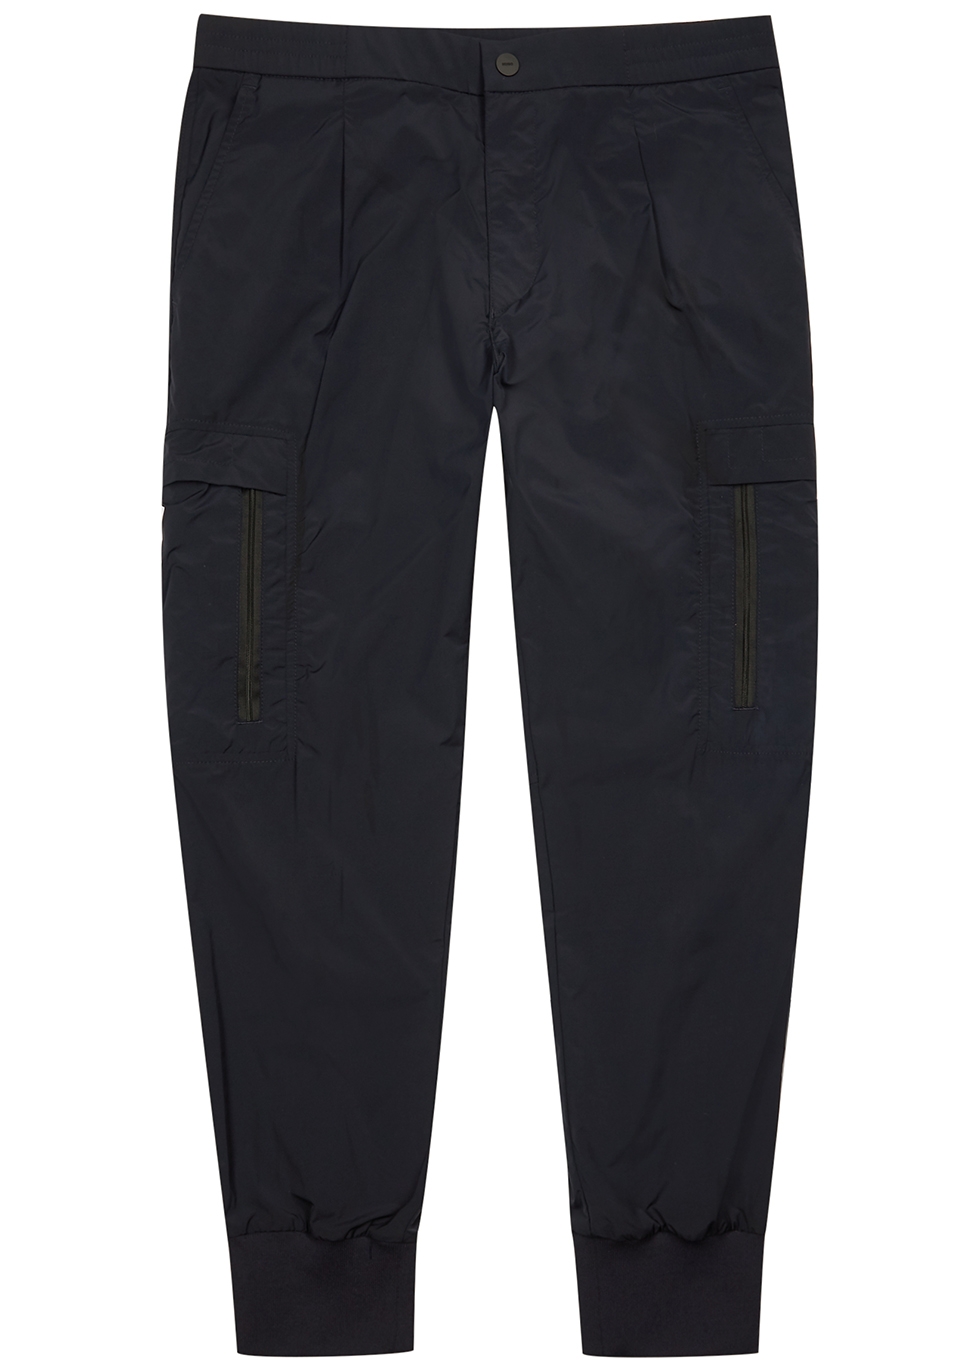 Navy shell trousers